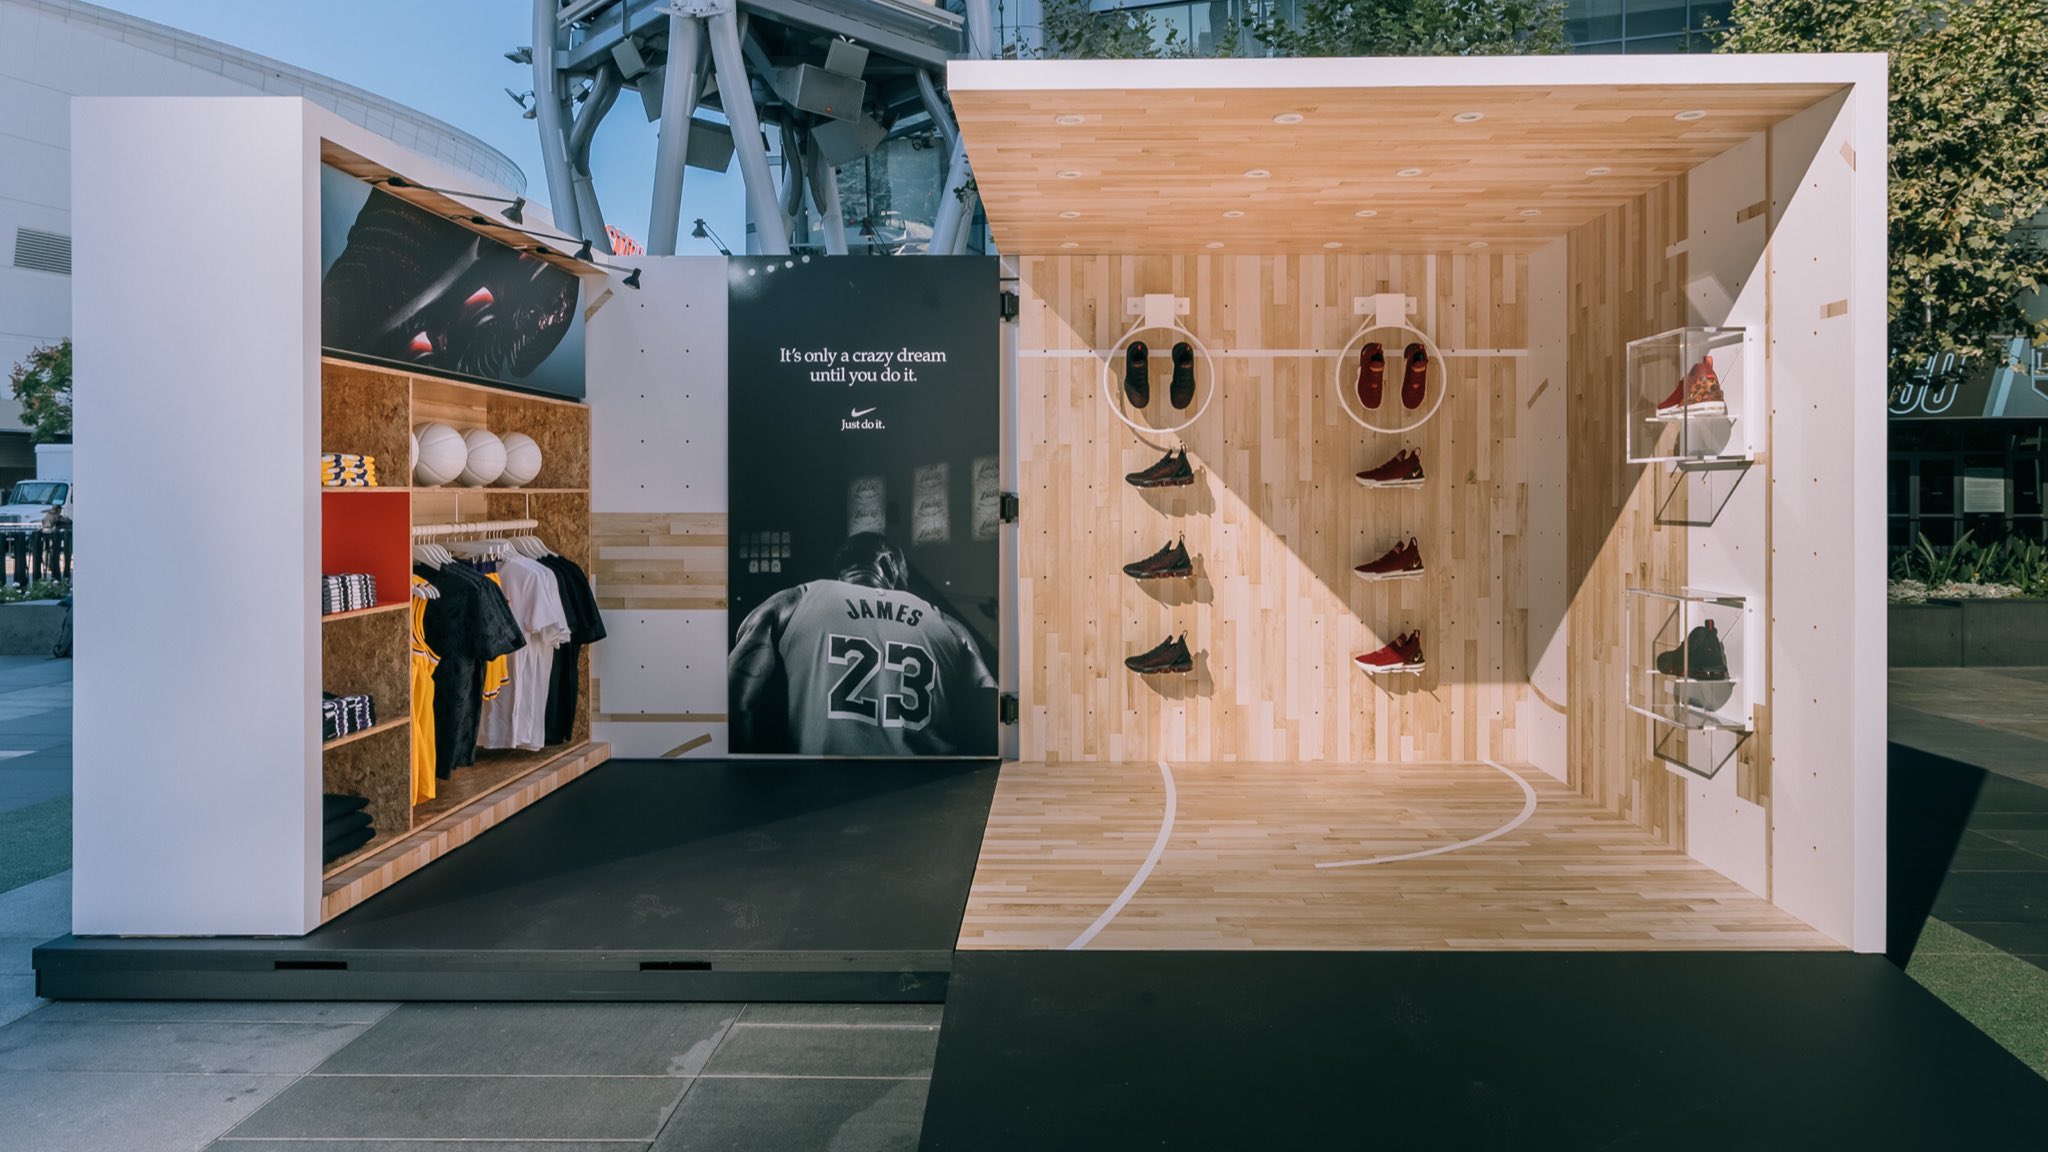 What You Can Expect From Nike's Pop-Up Shop